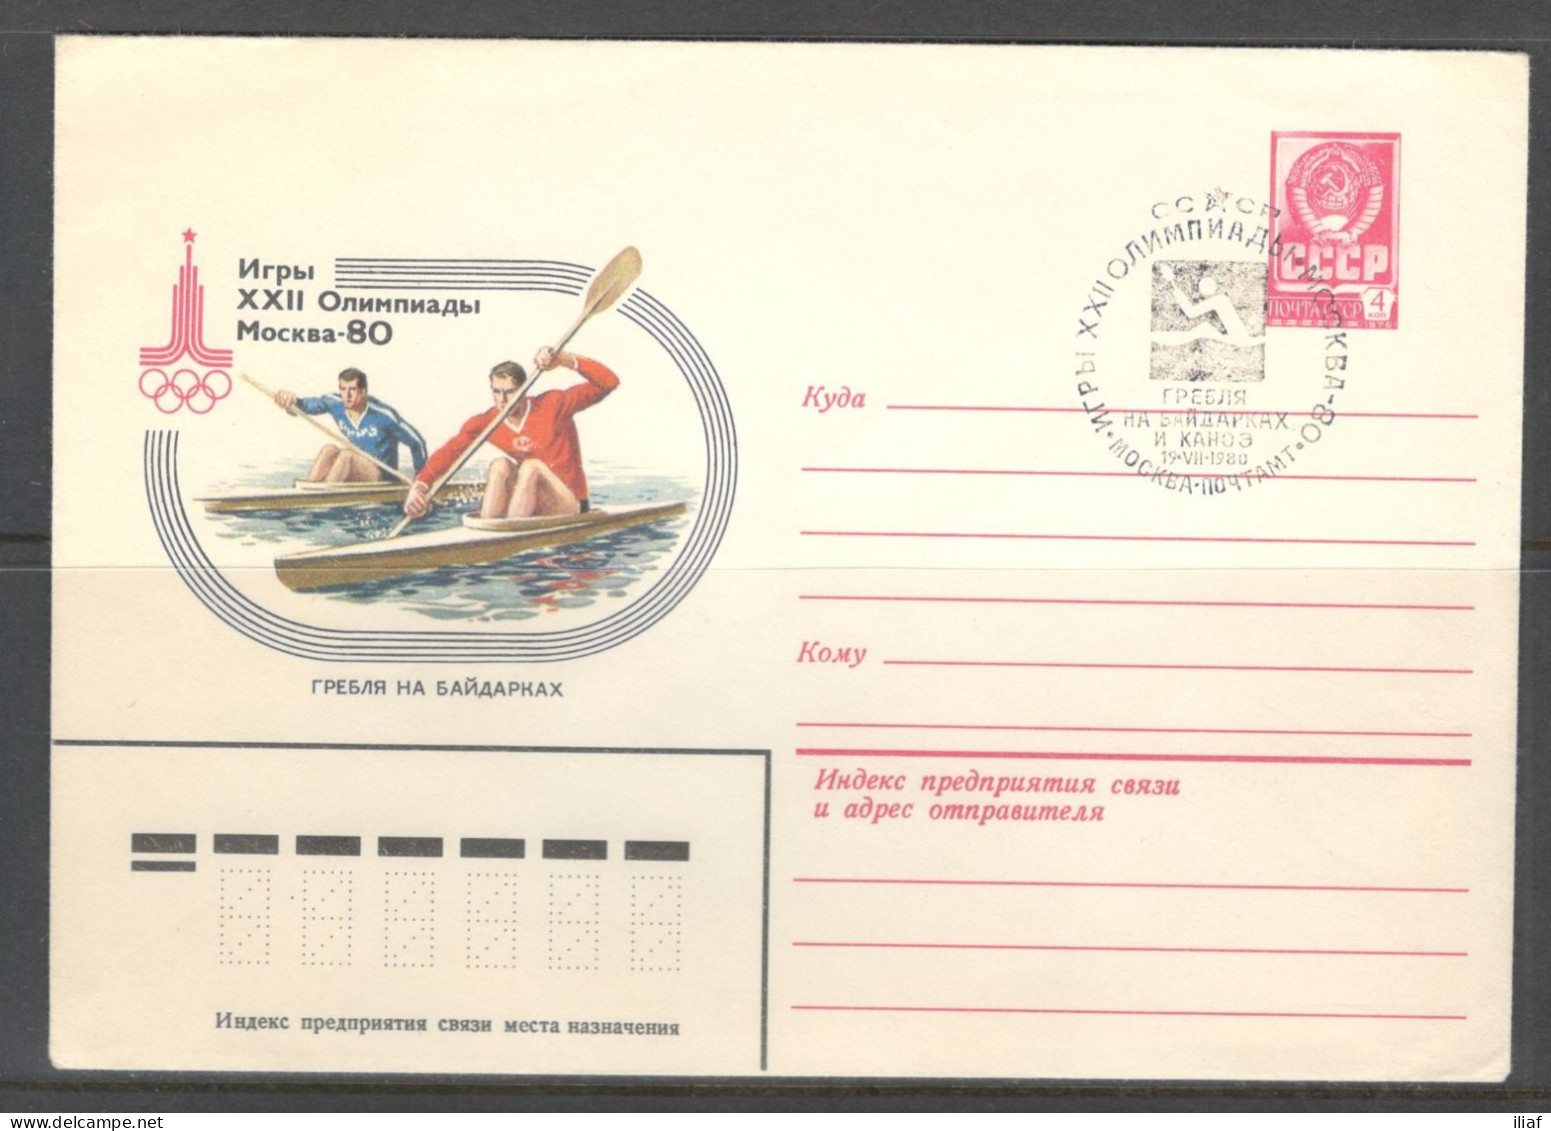 RUSSIA & USSR. Games Of The 22nd Olympiad Moscow-80. Kayaking And Canoeing.  Illustrated Envelope With Special Cancellat - Summer 1980: Moscow